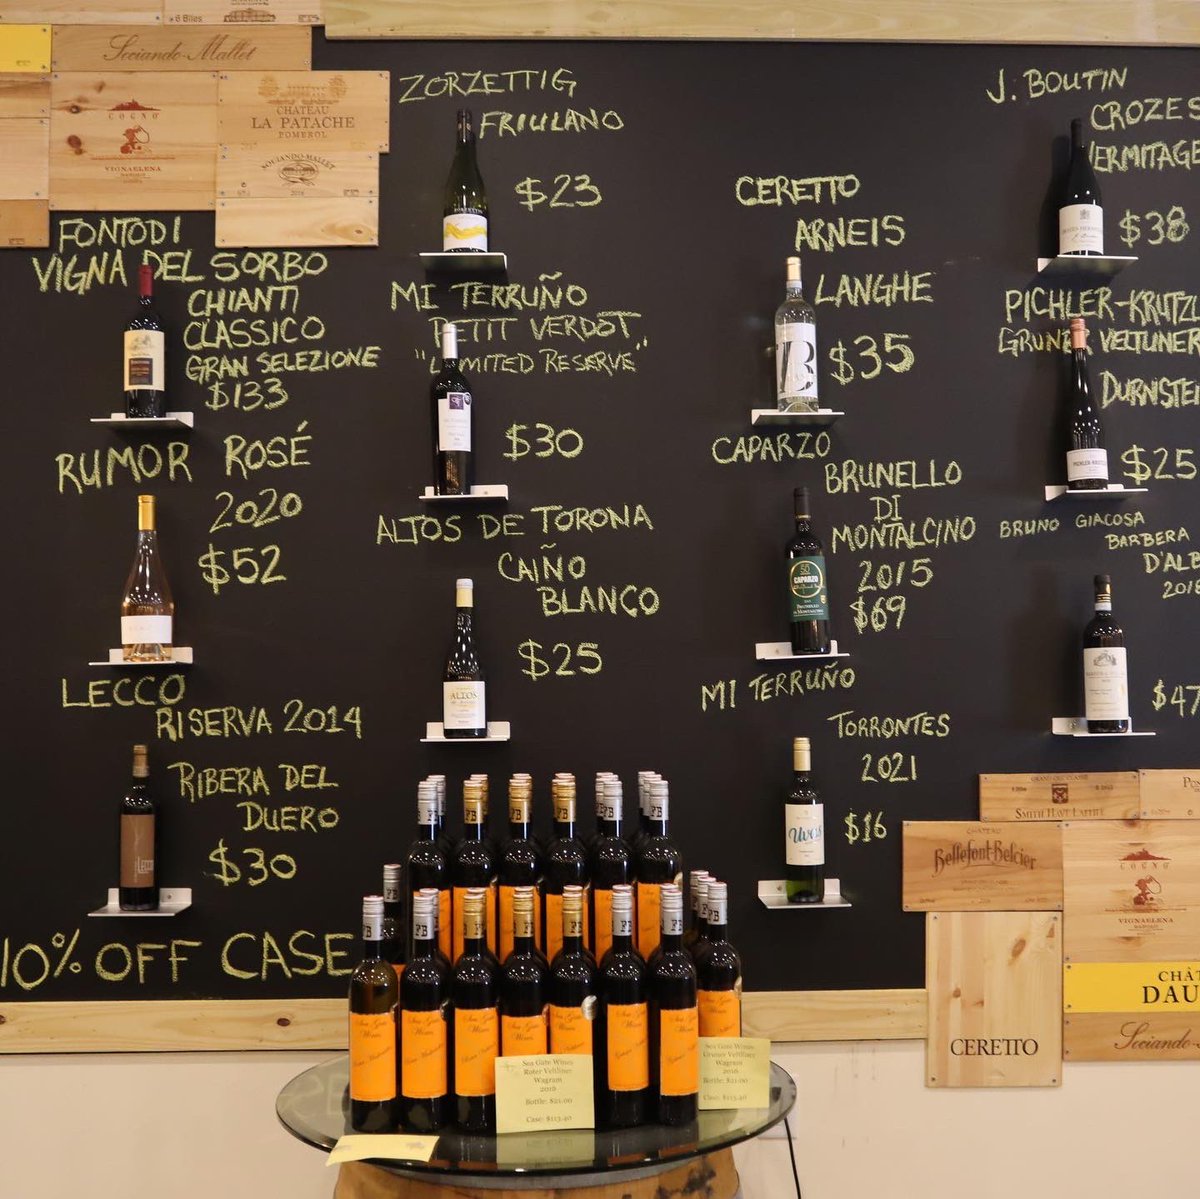 Y’all always saying ain’t nothing to do in Freeport… check out Sea Gate Wines tasting bar where you could try out 4 different wines for as little as $20. This a nice date activity for lovebirds. Read it on the blog ⬇️ tastywithkc.com/sea-gate-wines/